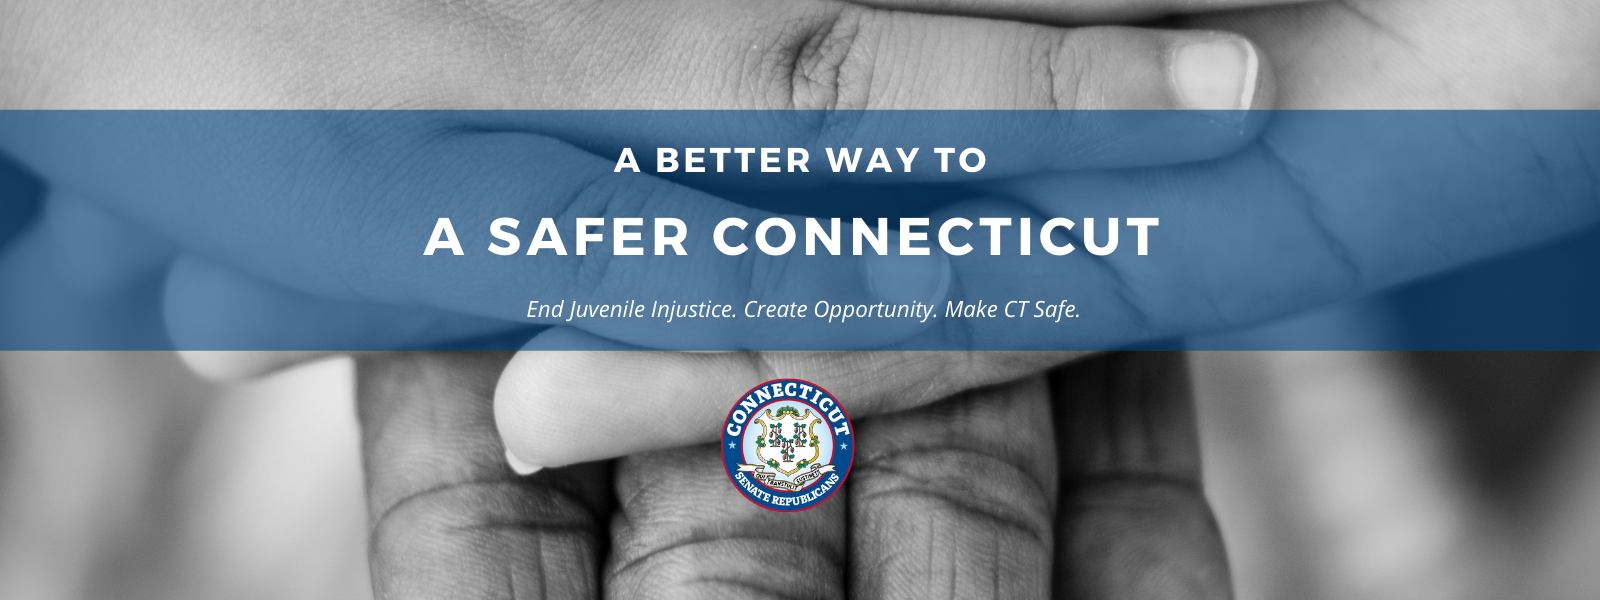 A Better Way to a Safer Connecticut